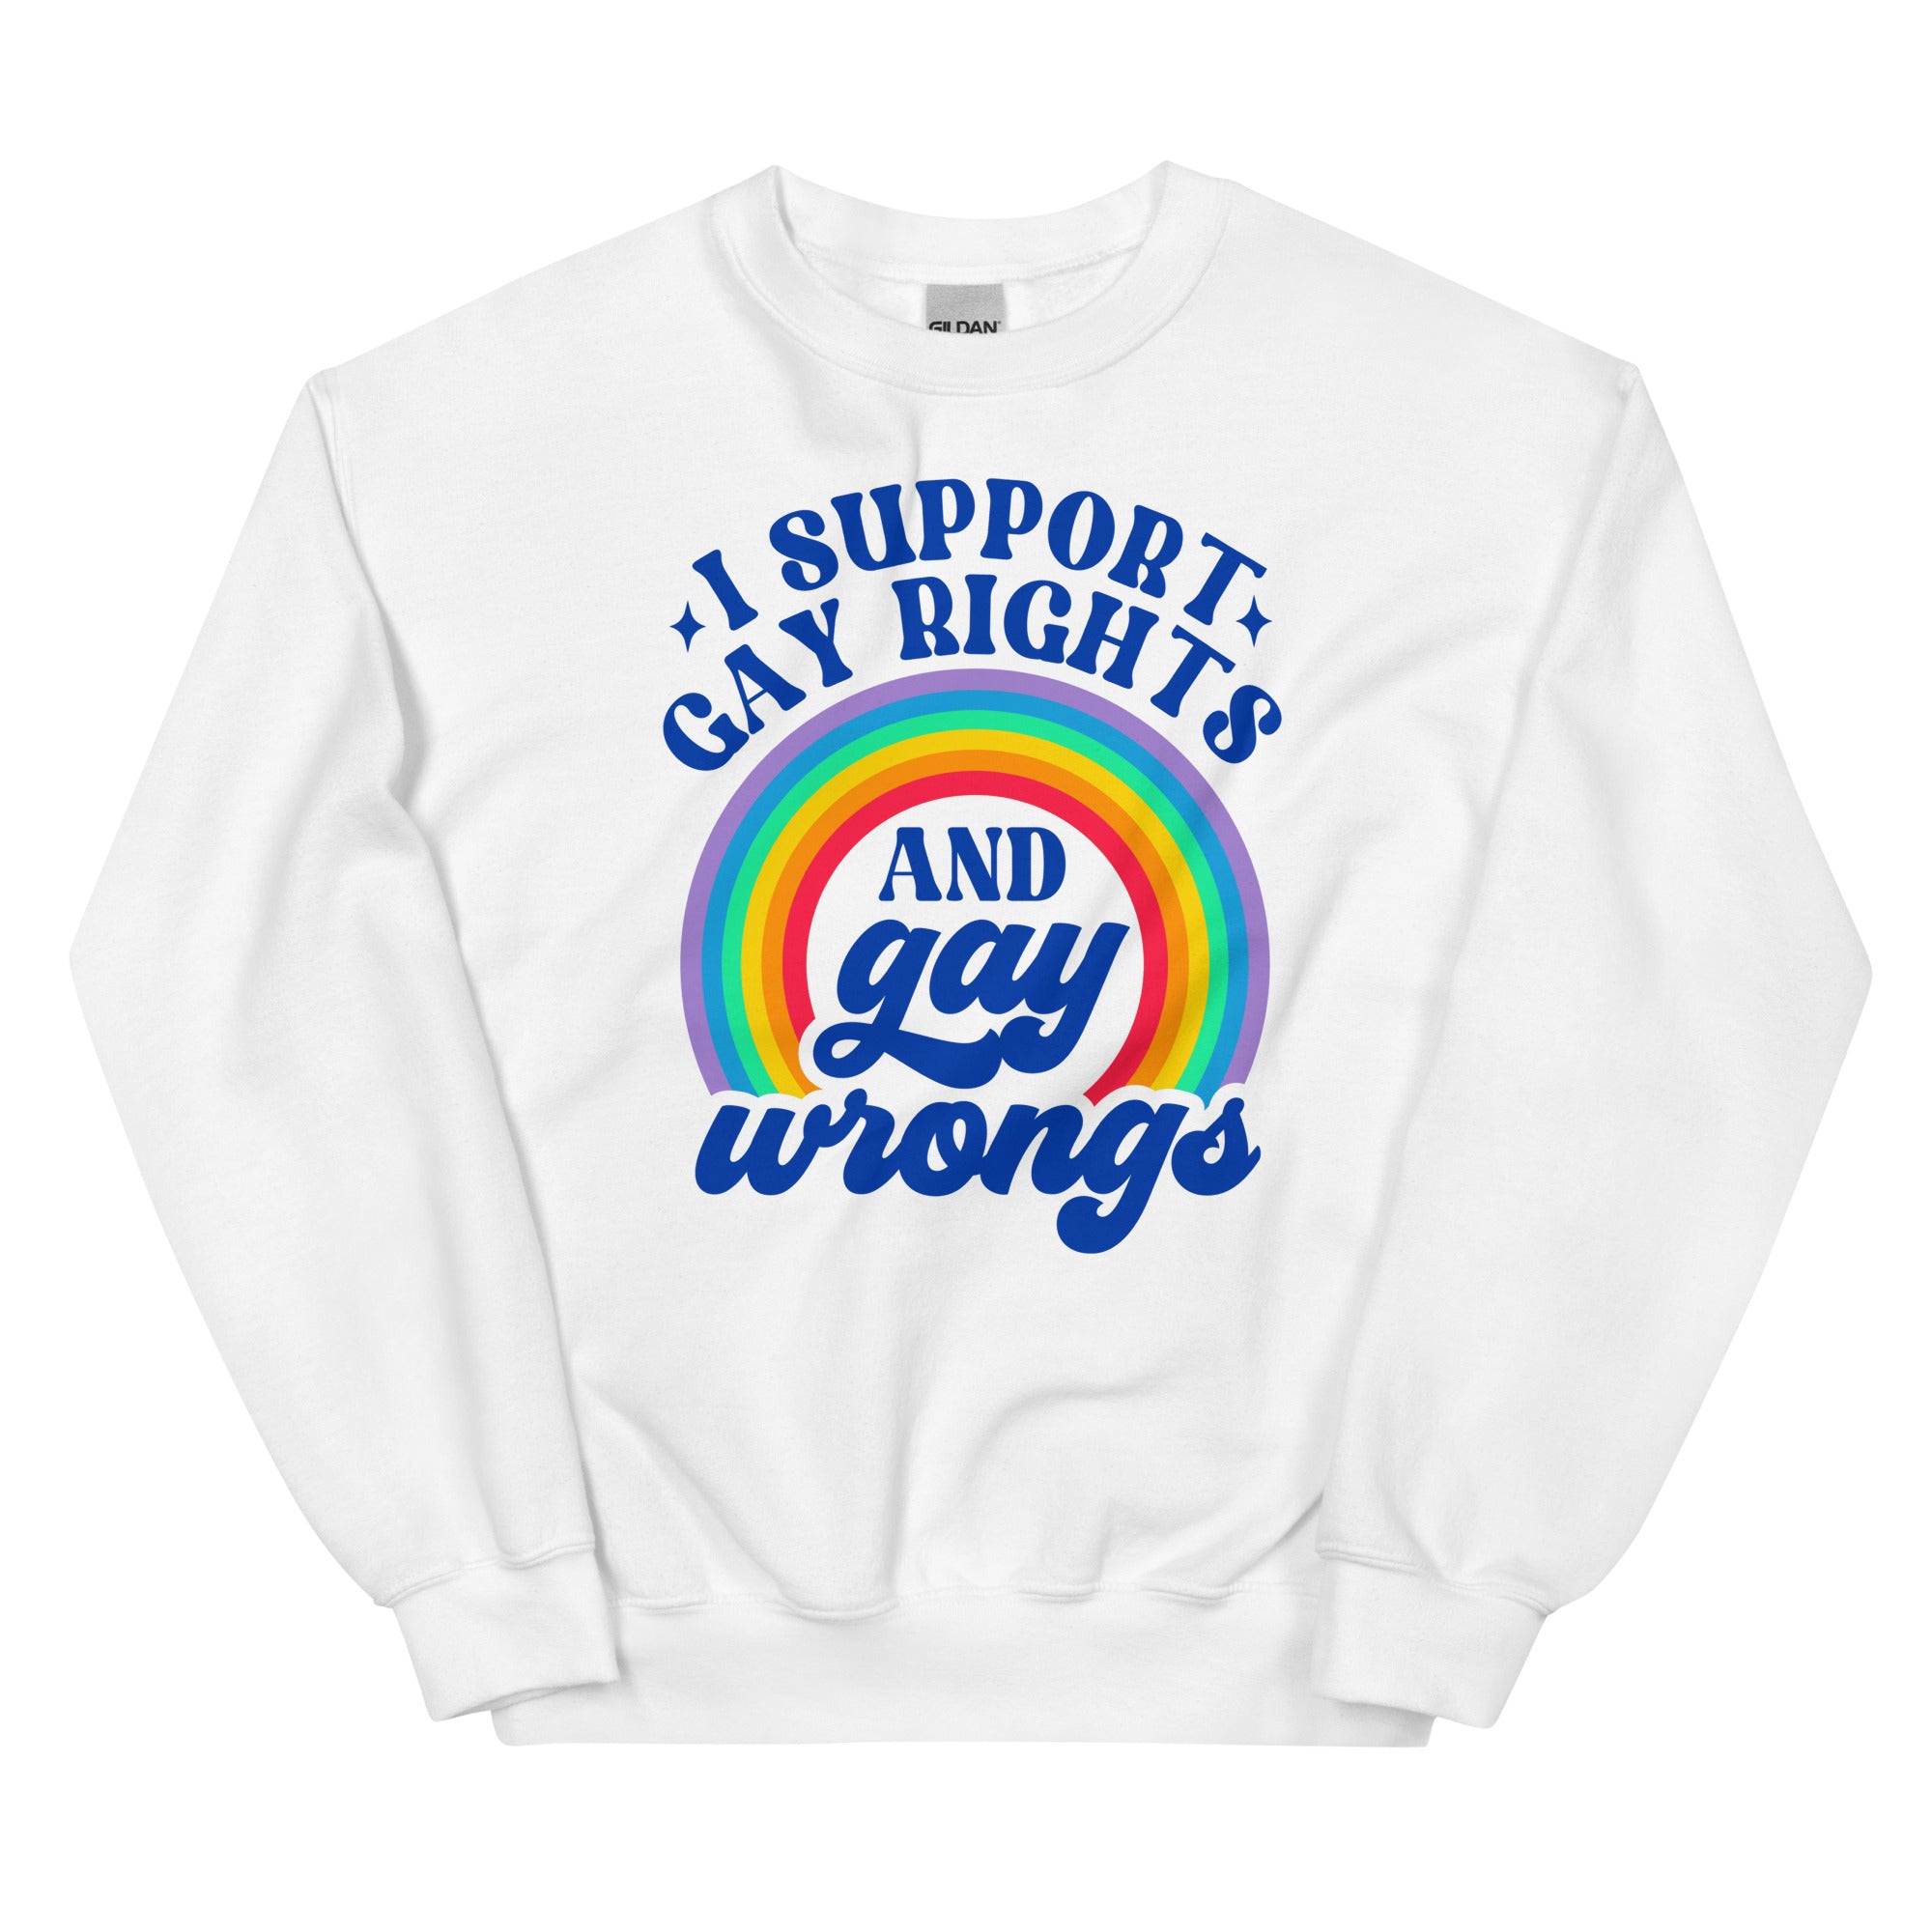 I SUPPORT GAY RIGHTS AND gay wrongs Unisex Sweat Shirt